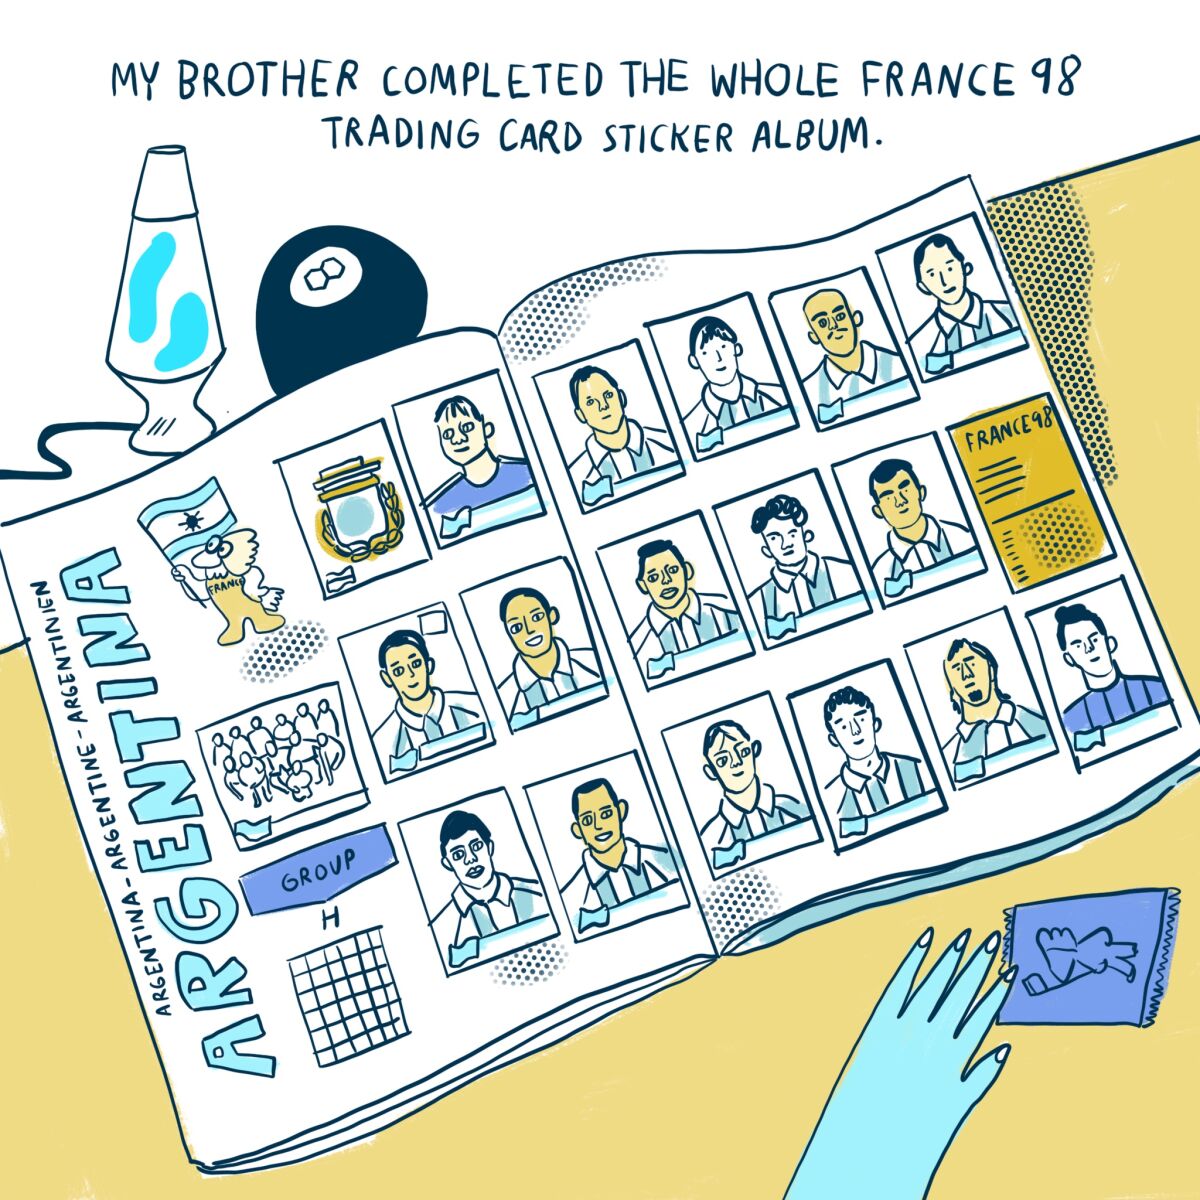 My brother complete the whole France 98 trading card sticker album 